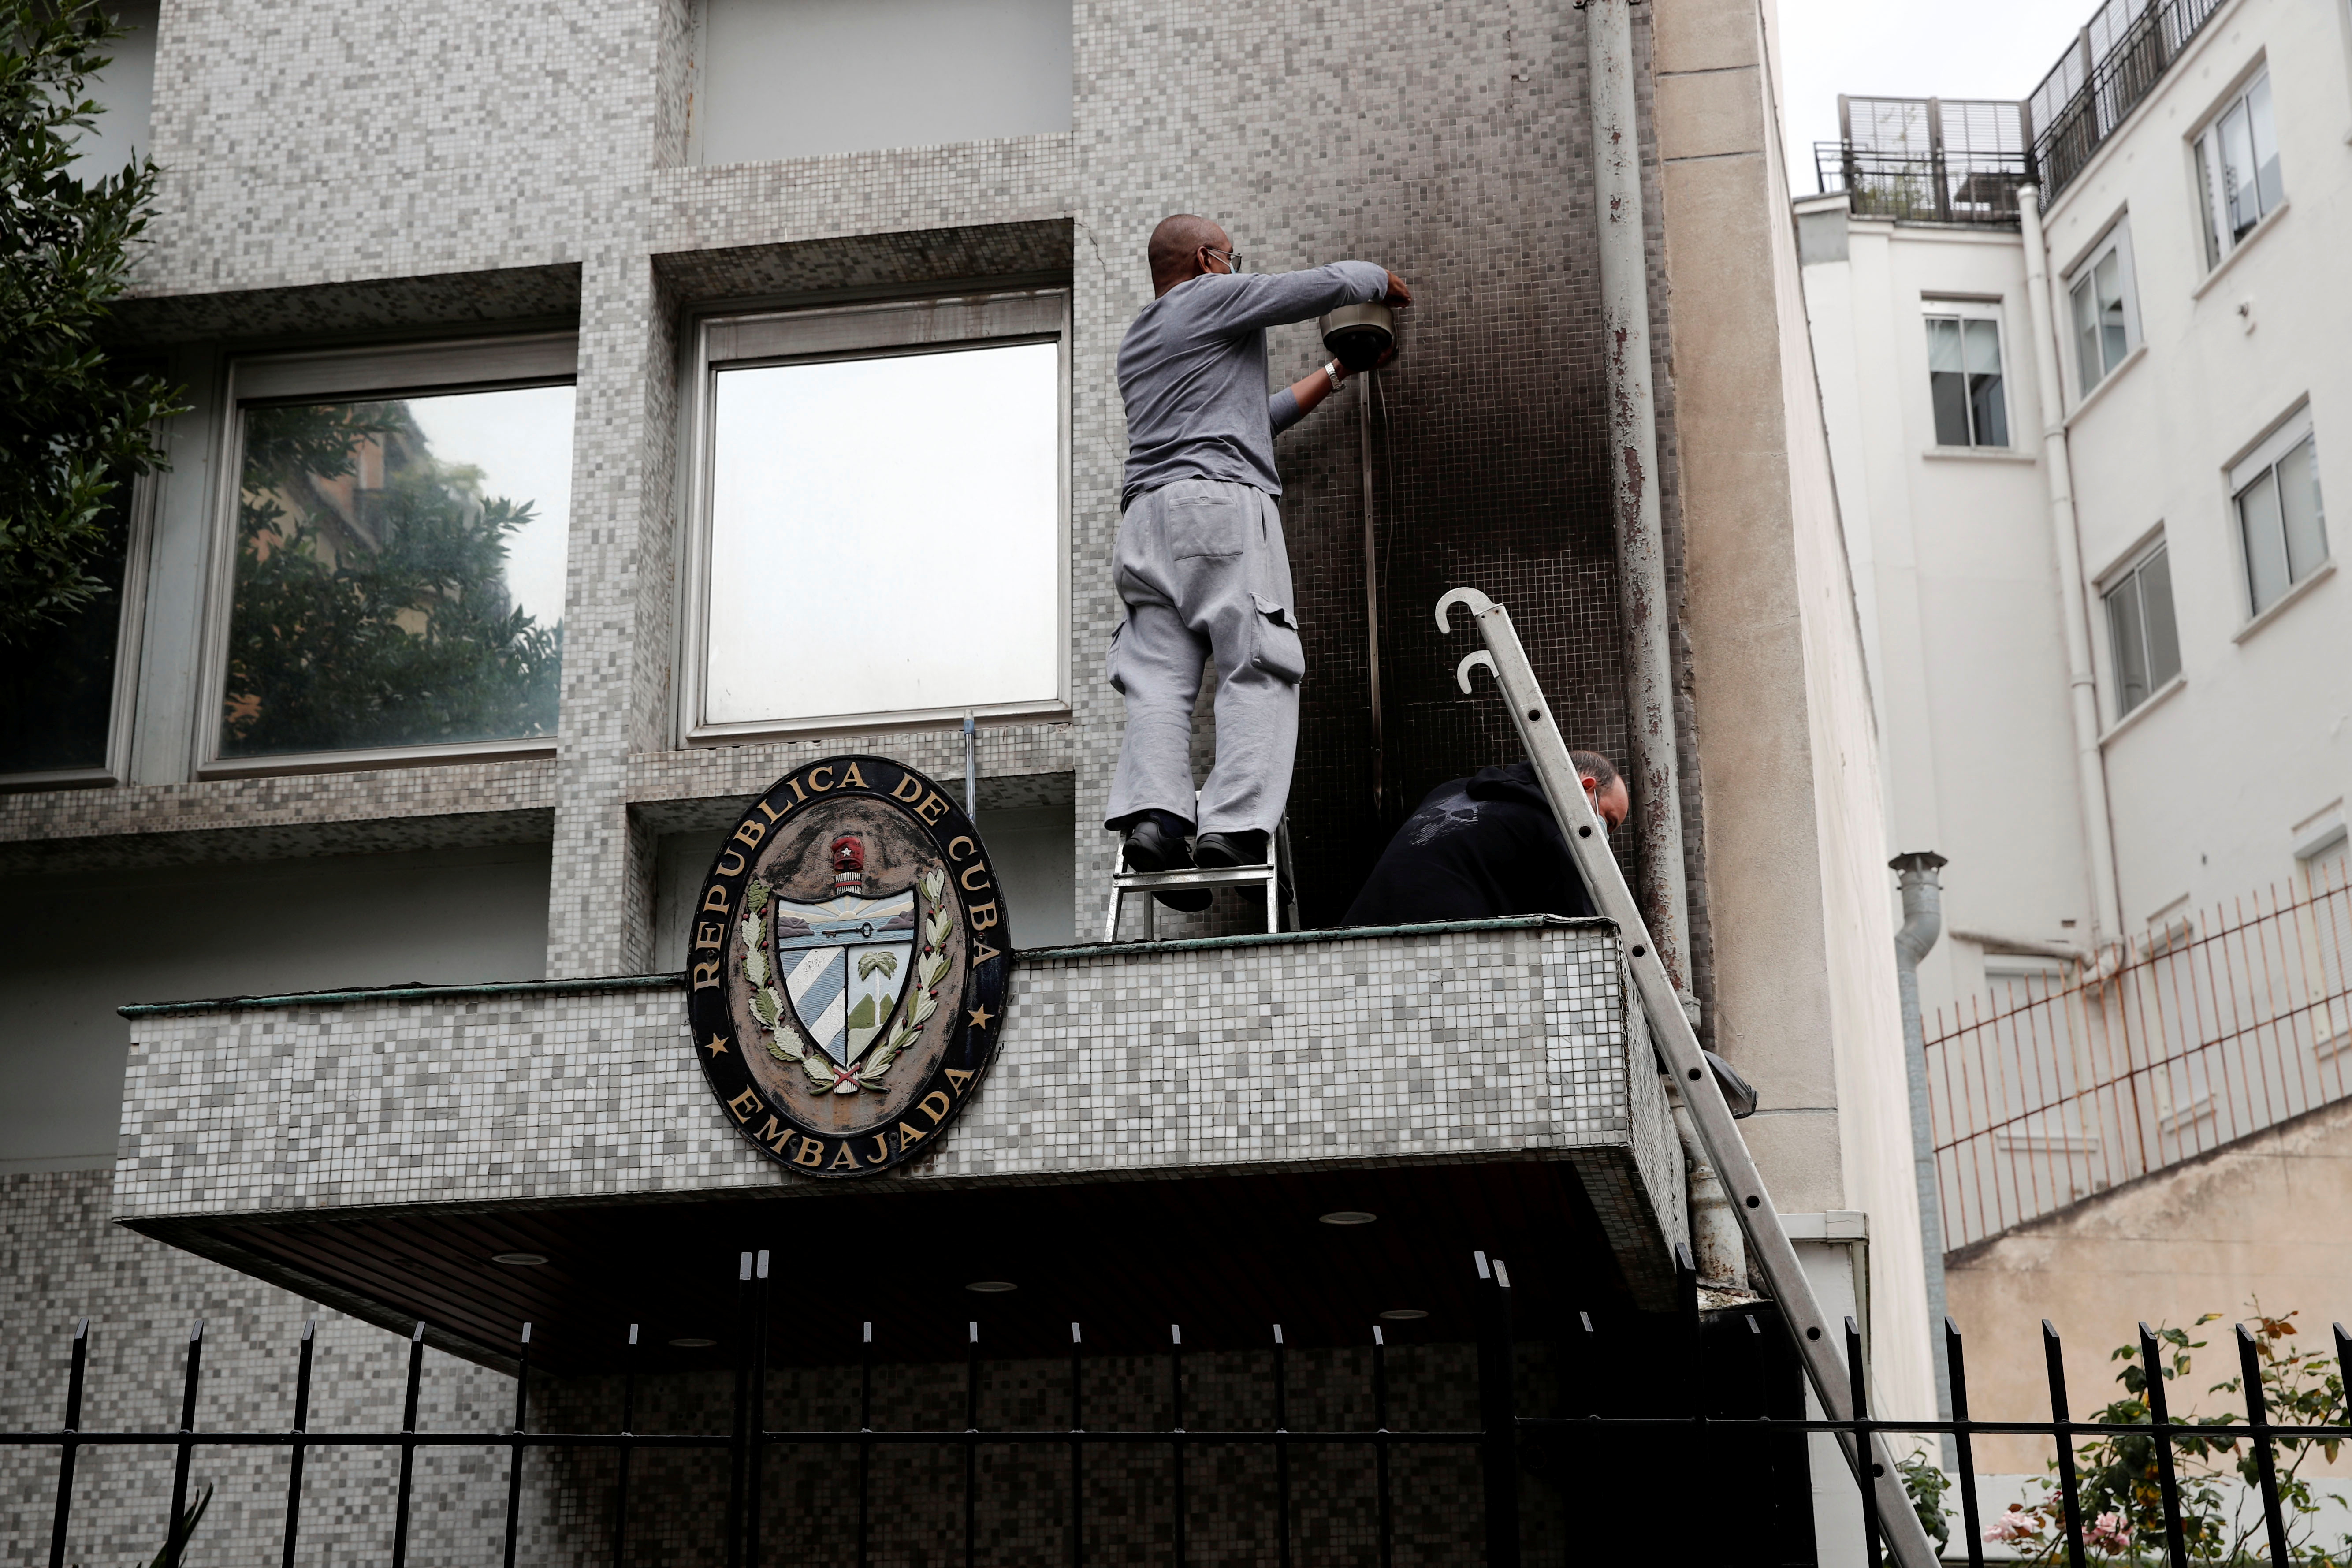 Experts inspect the damage at the Cuban embassy following an overnight petrol bomb attack on its building, in Paris, France July 27, 2021. REUTERS/Benoit Tessier